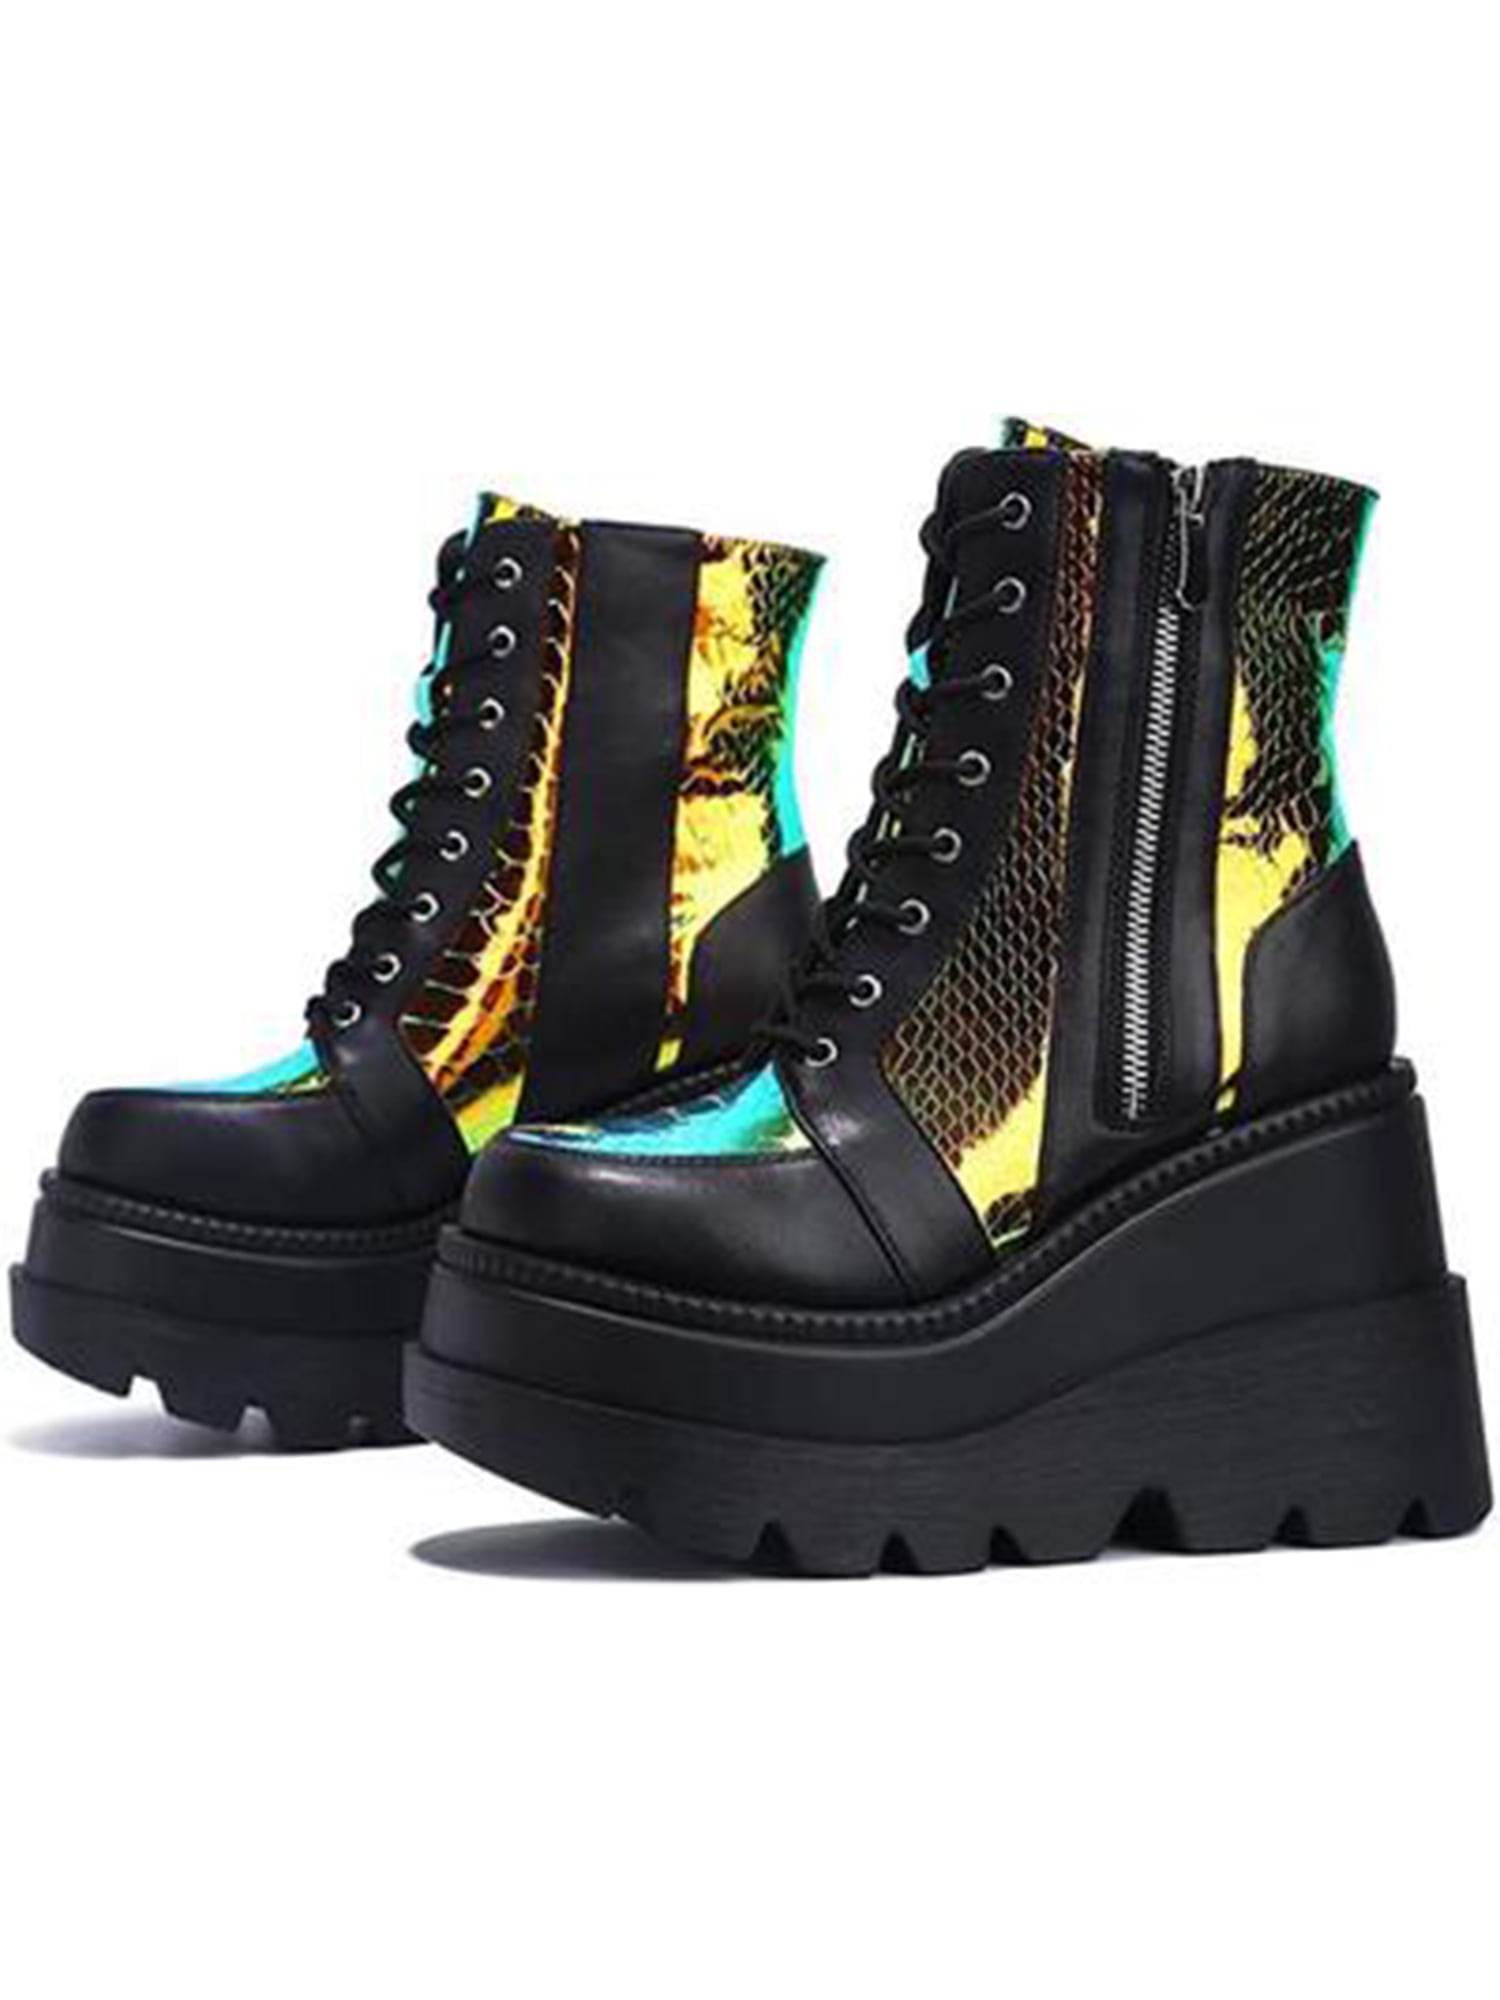 Details about   Womens Goth Punk Platform Mid Calf Ankle Boots Motorcycle Round Toe Lace Up Shoe 